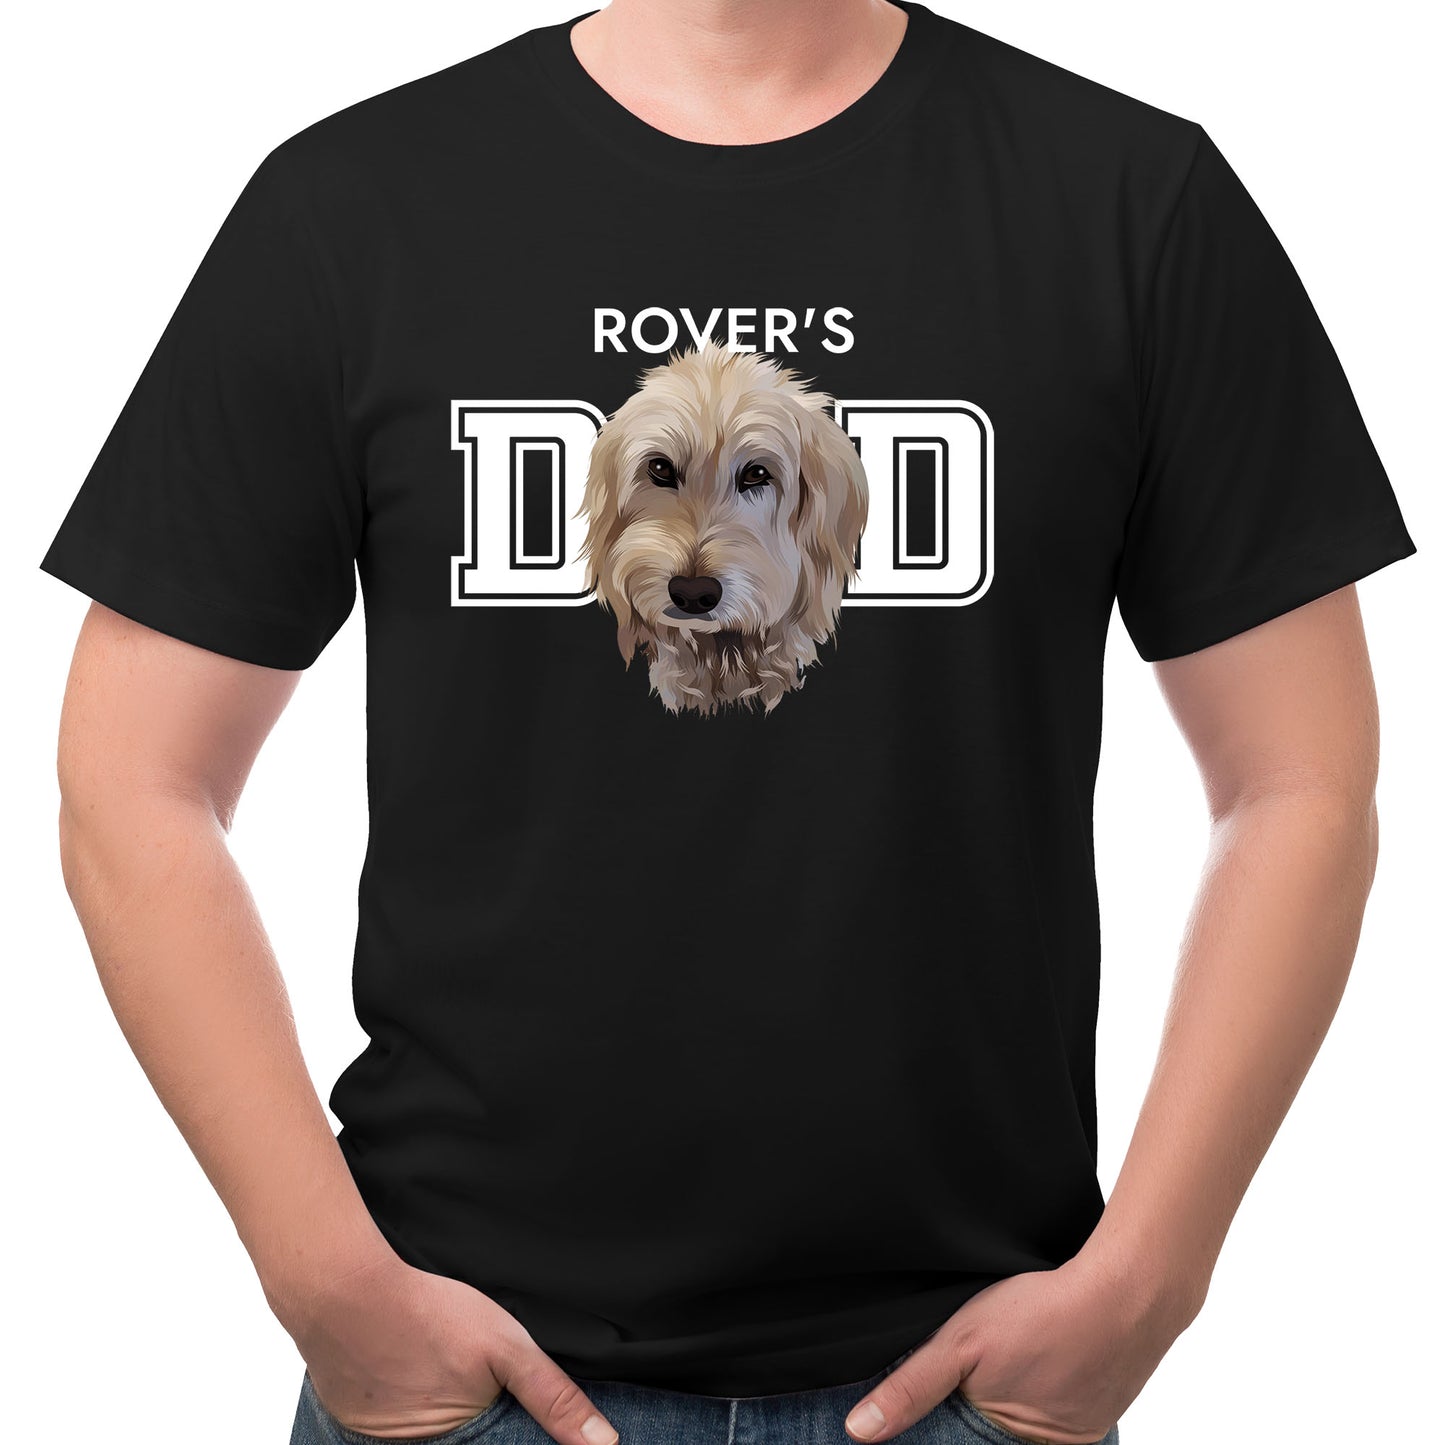 Custom Dad T-shirt With His Pet's Image